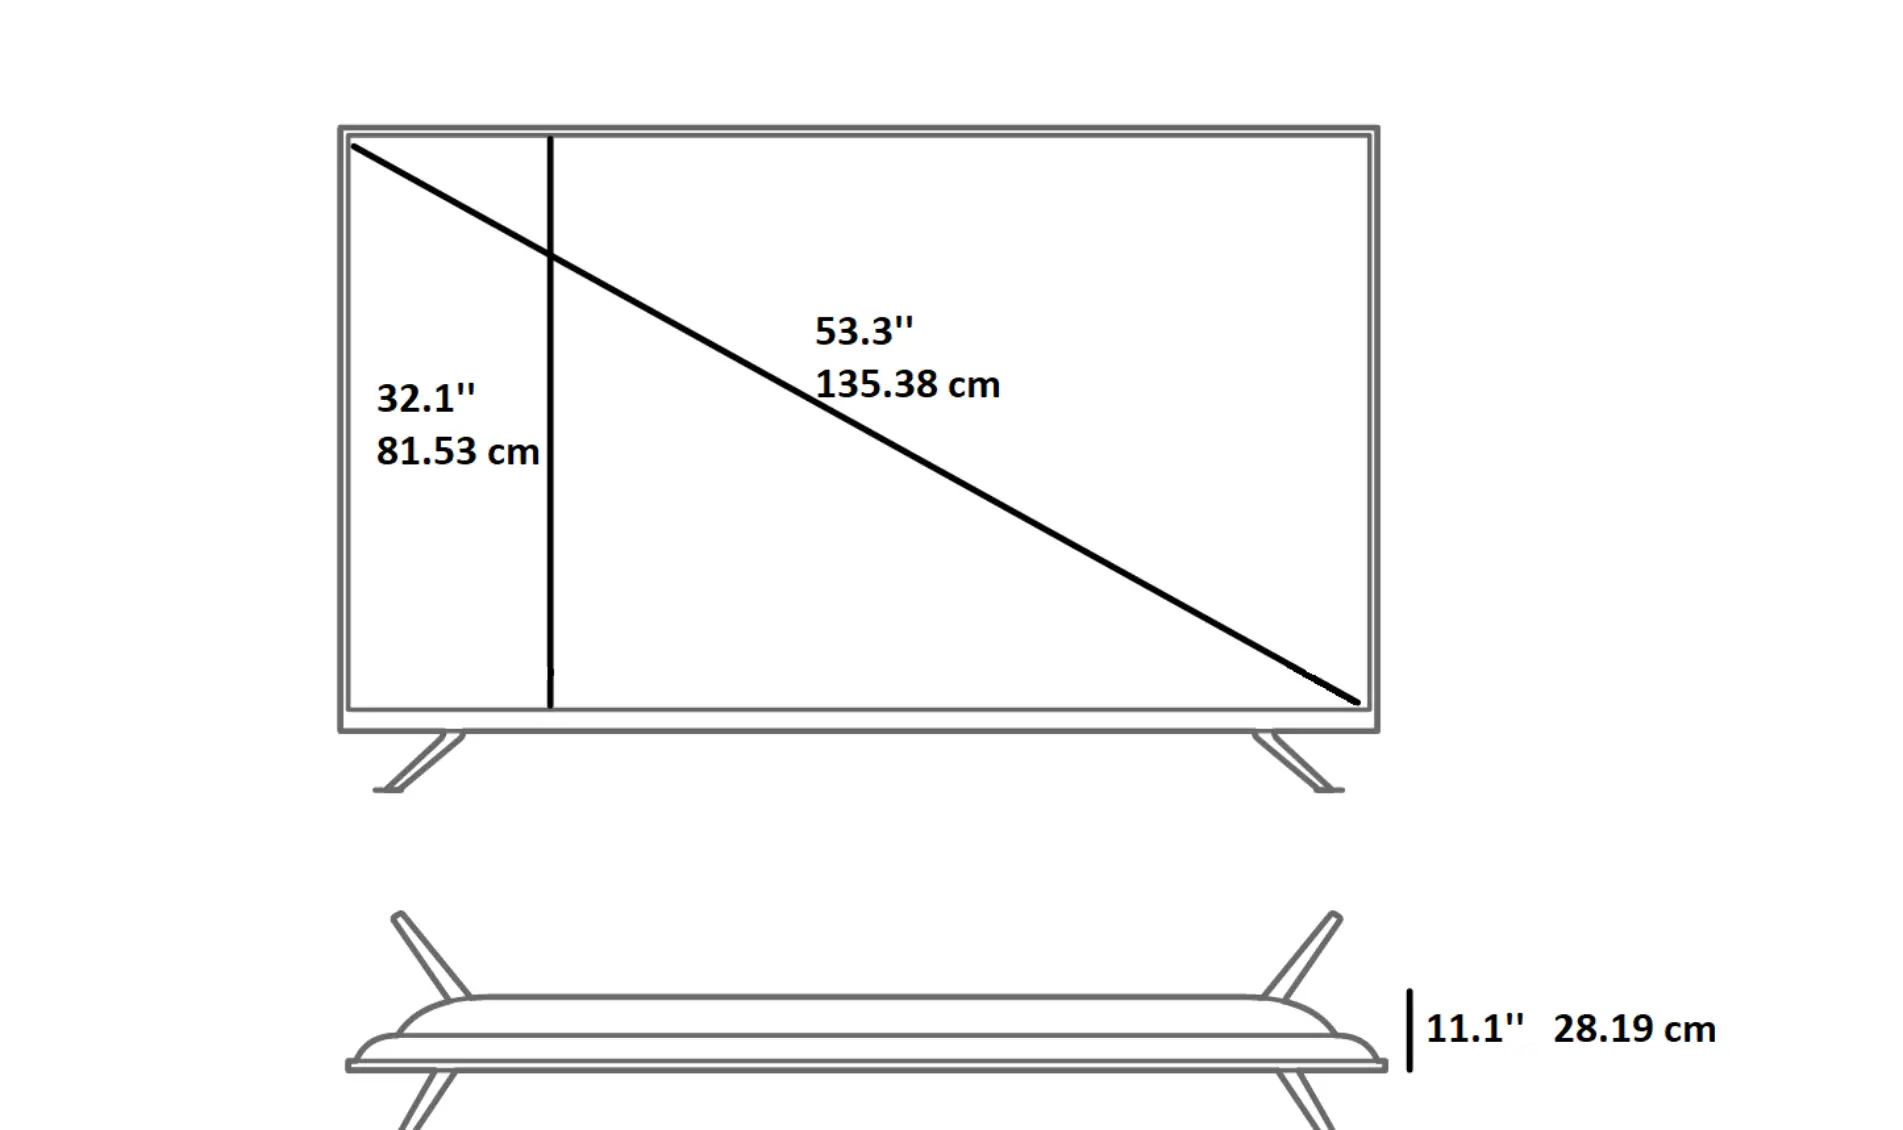 60 inch TV height and width